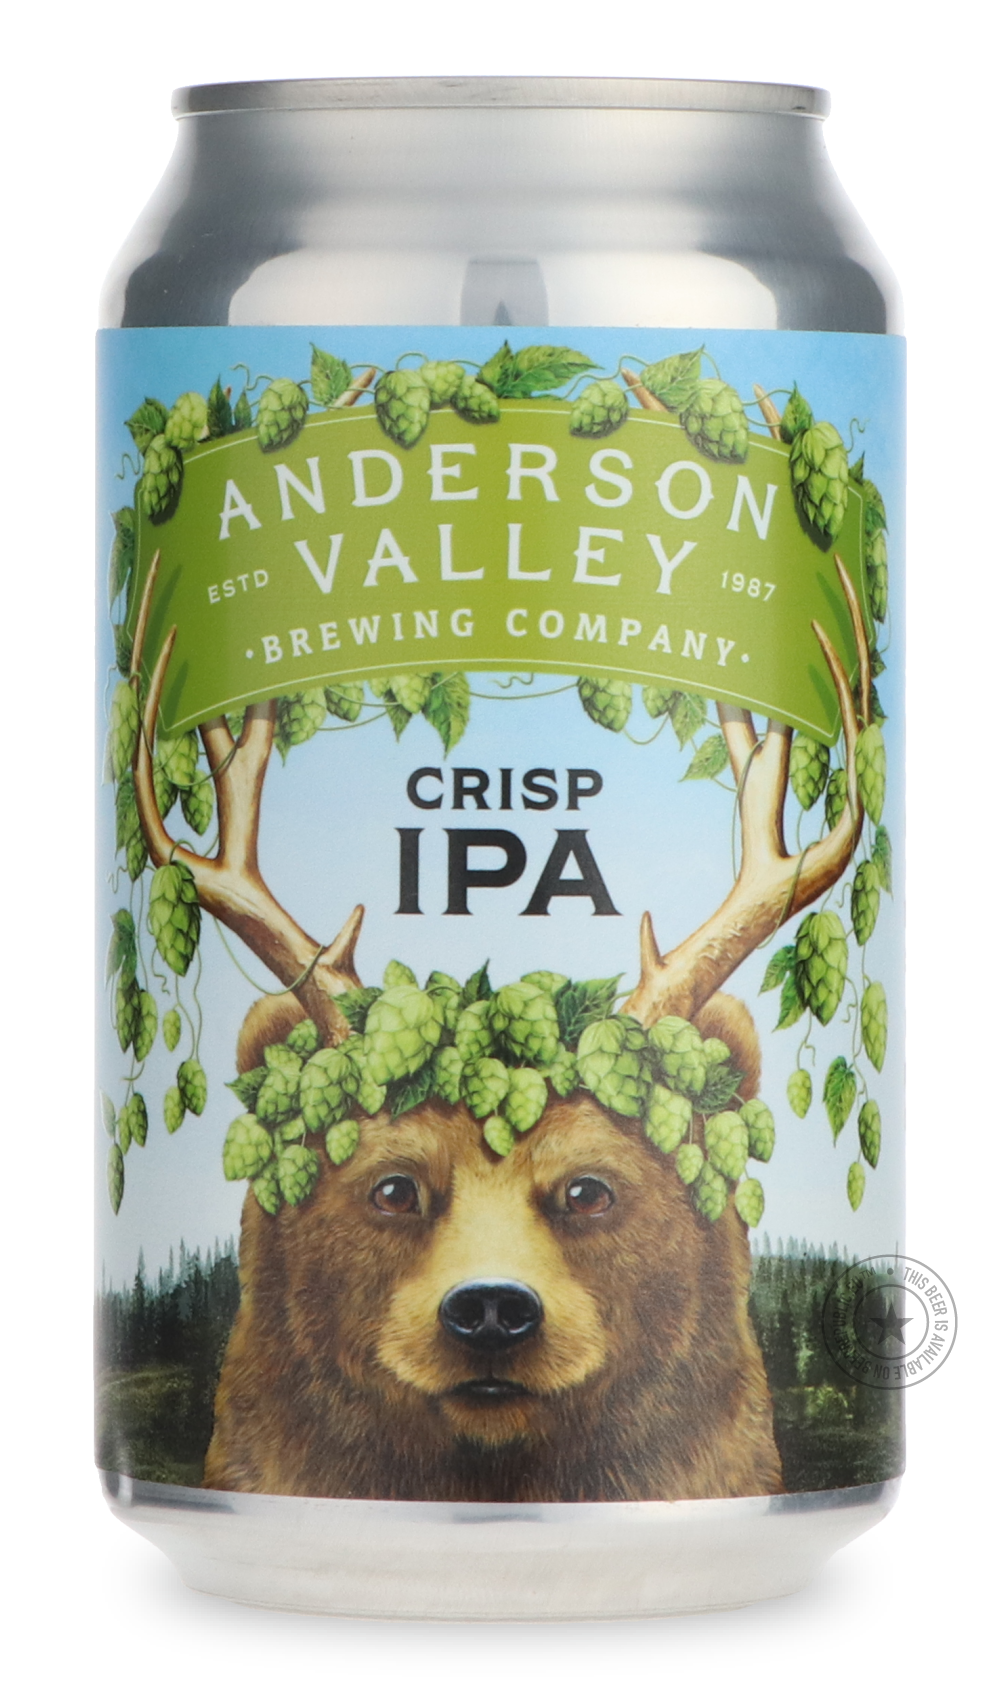 -Anderson Valley- Crisp IPA-IPA- Only @ Beer Republic - The best online beer store for American & Canadian craft beer - Buy beer online from the USA and Canada - Bier online kopen - Amerikaans bier kopen - Craft beer store - Craft beer kopen - Amerikanisch bier kaufen - Bier online kaufen - Acheter biere online - IPA - Stout - Porter - New England IPA - Hazy IPA - Imperial Stout - Barrel Aged - Barrel Aged Imperial Stout - Brown - Dark beer - Blond - Blonde - Pilsner - Lager - Wheat - Weizen - Amber - Barle